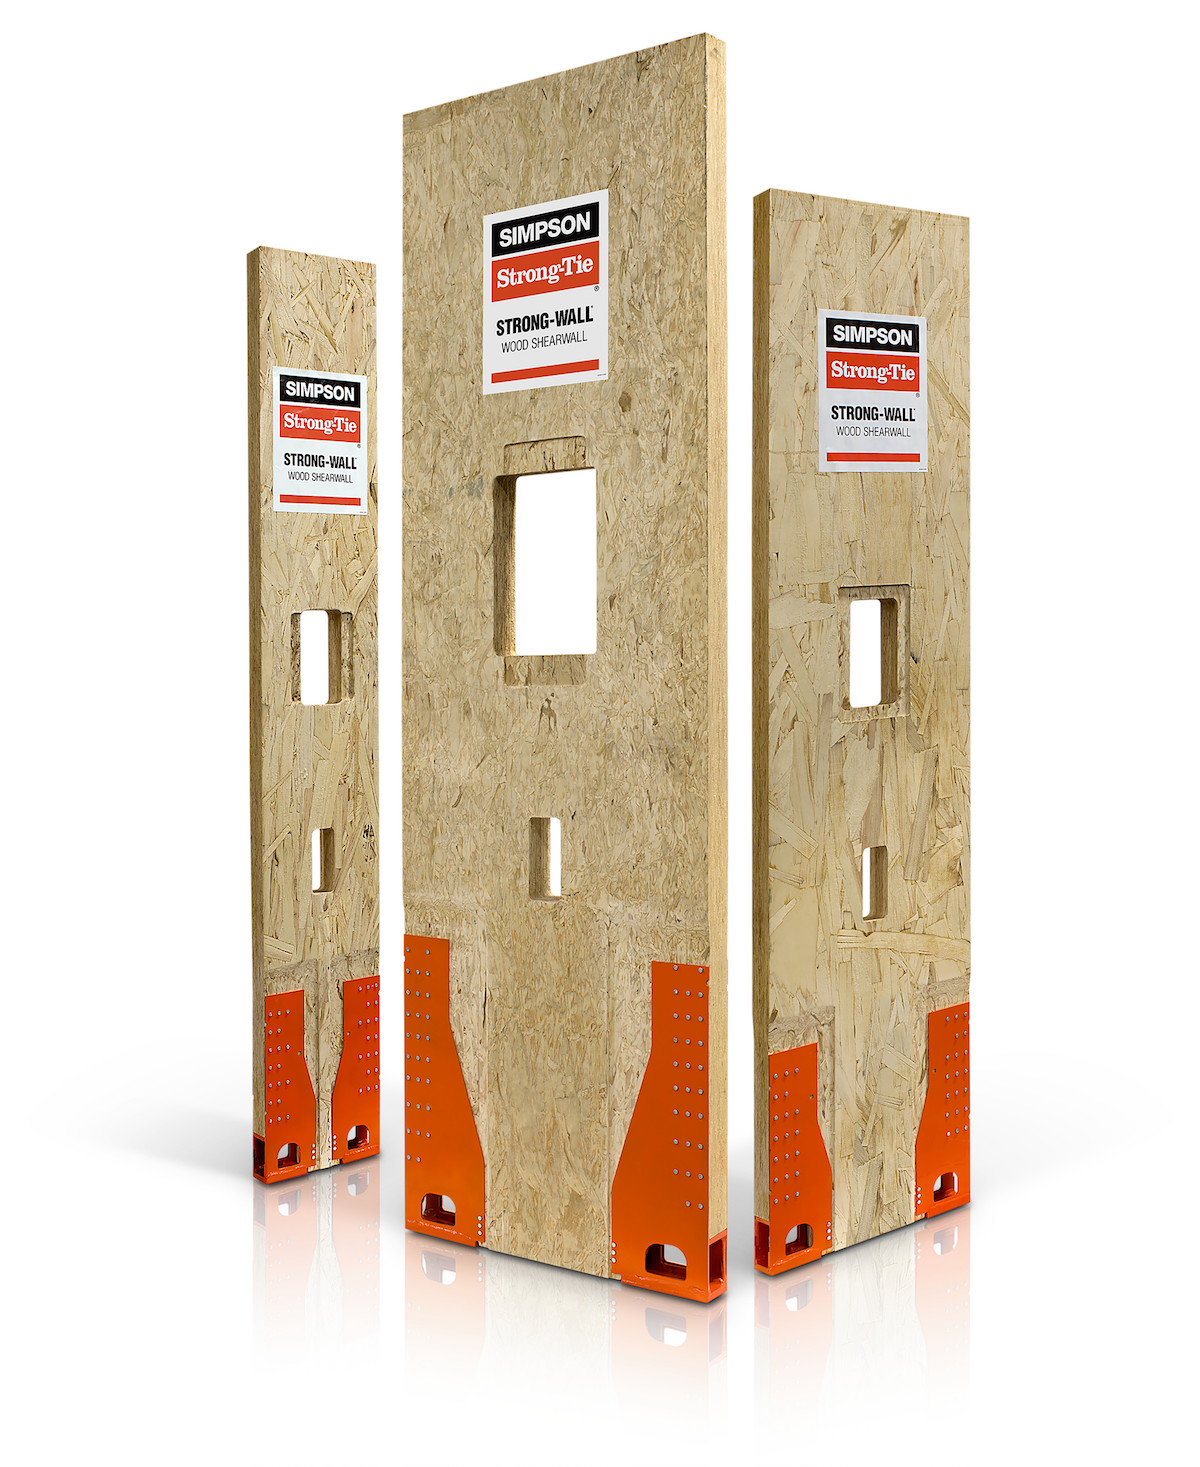 Strong-Wall SB is a prefabricated wood shearwall designed to provide greater lateral-force resistance performance compared with conventional wood shearwalls, according to Simpson Strong-Tie